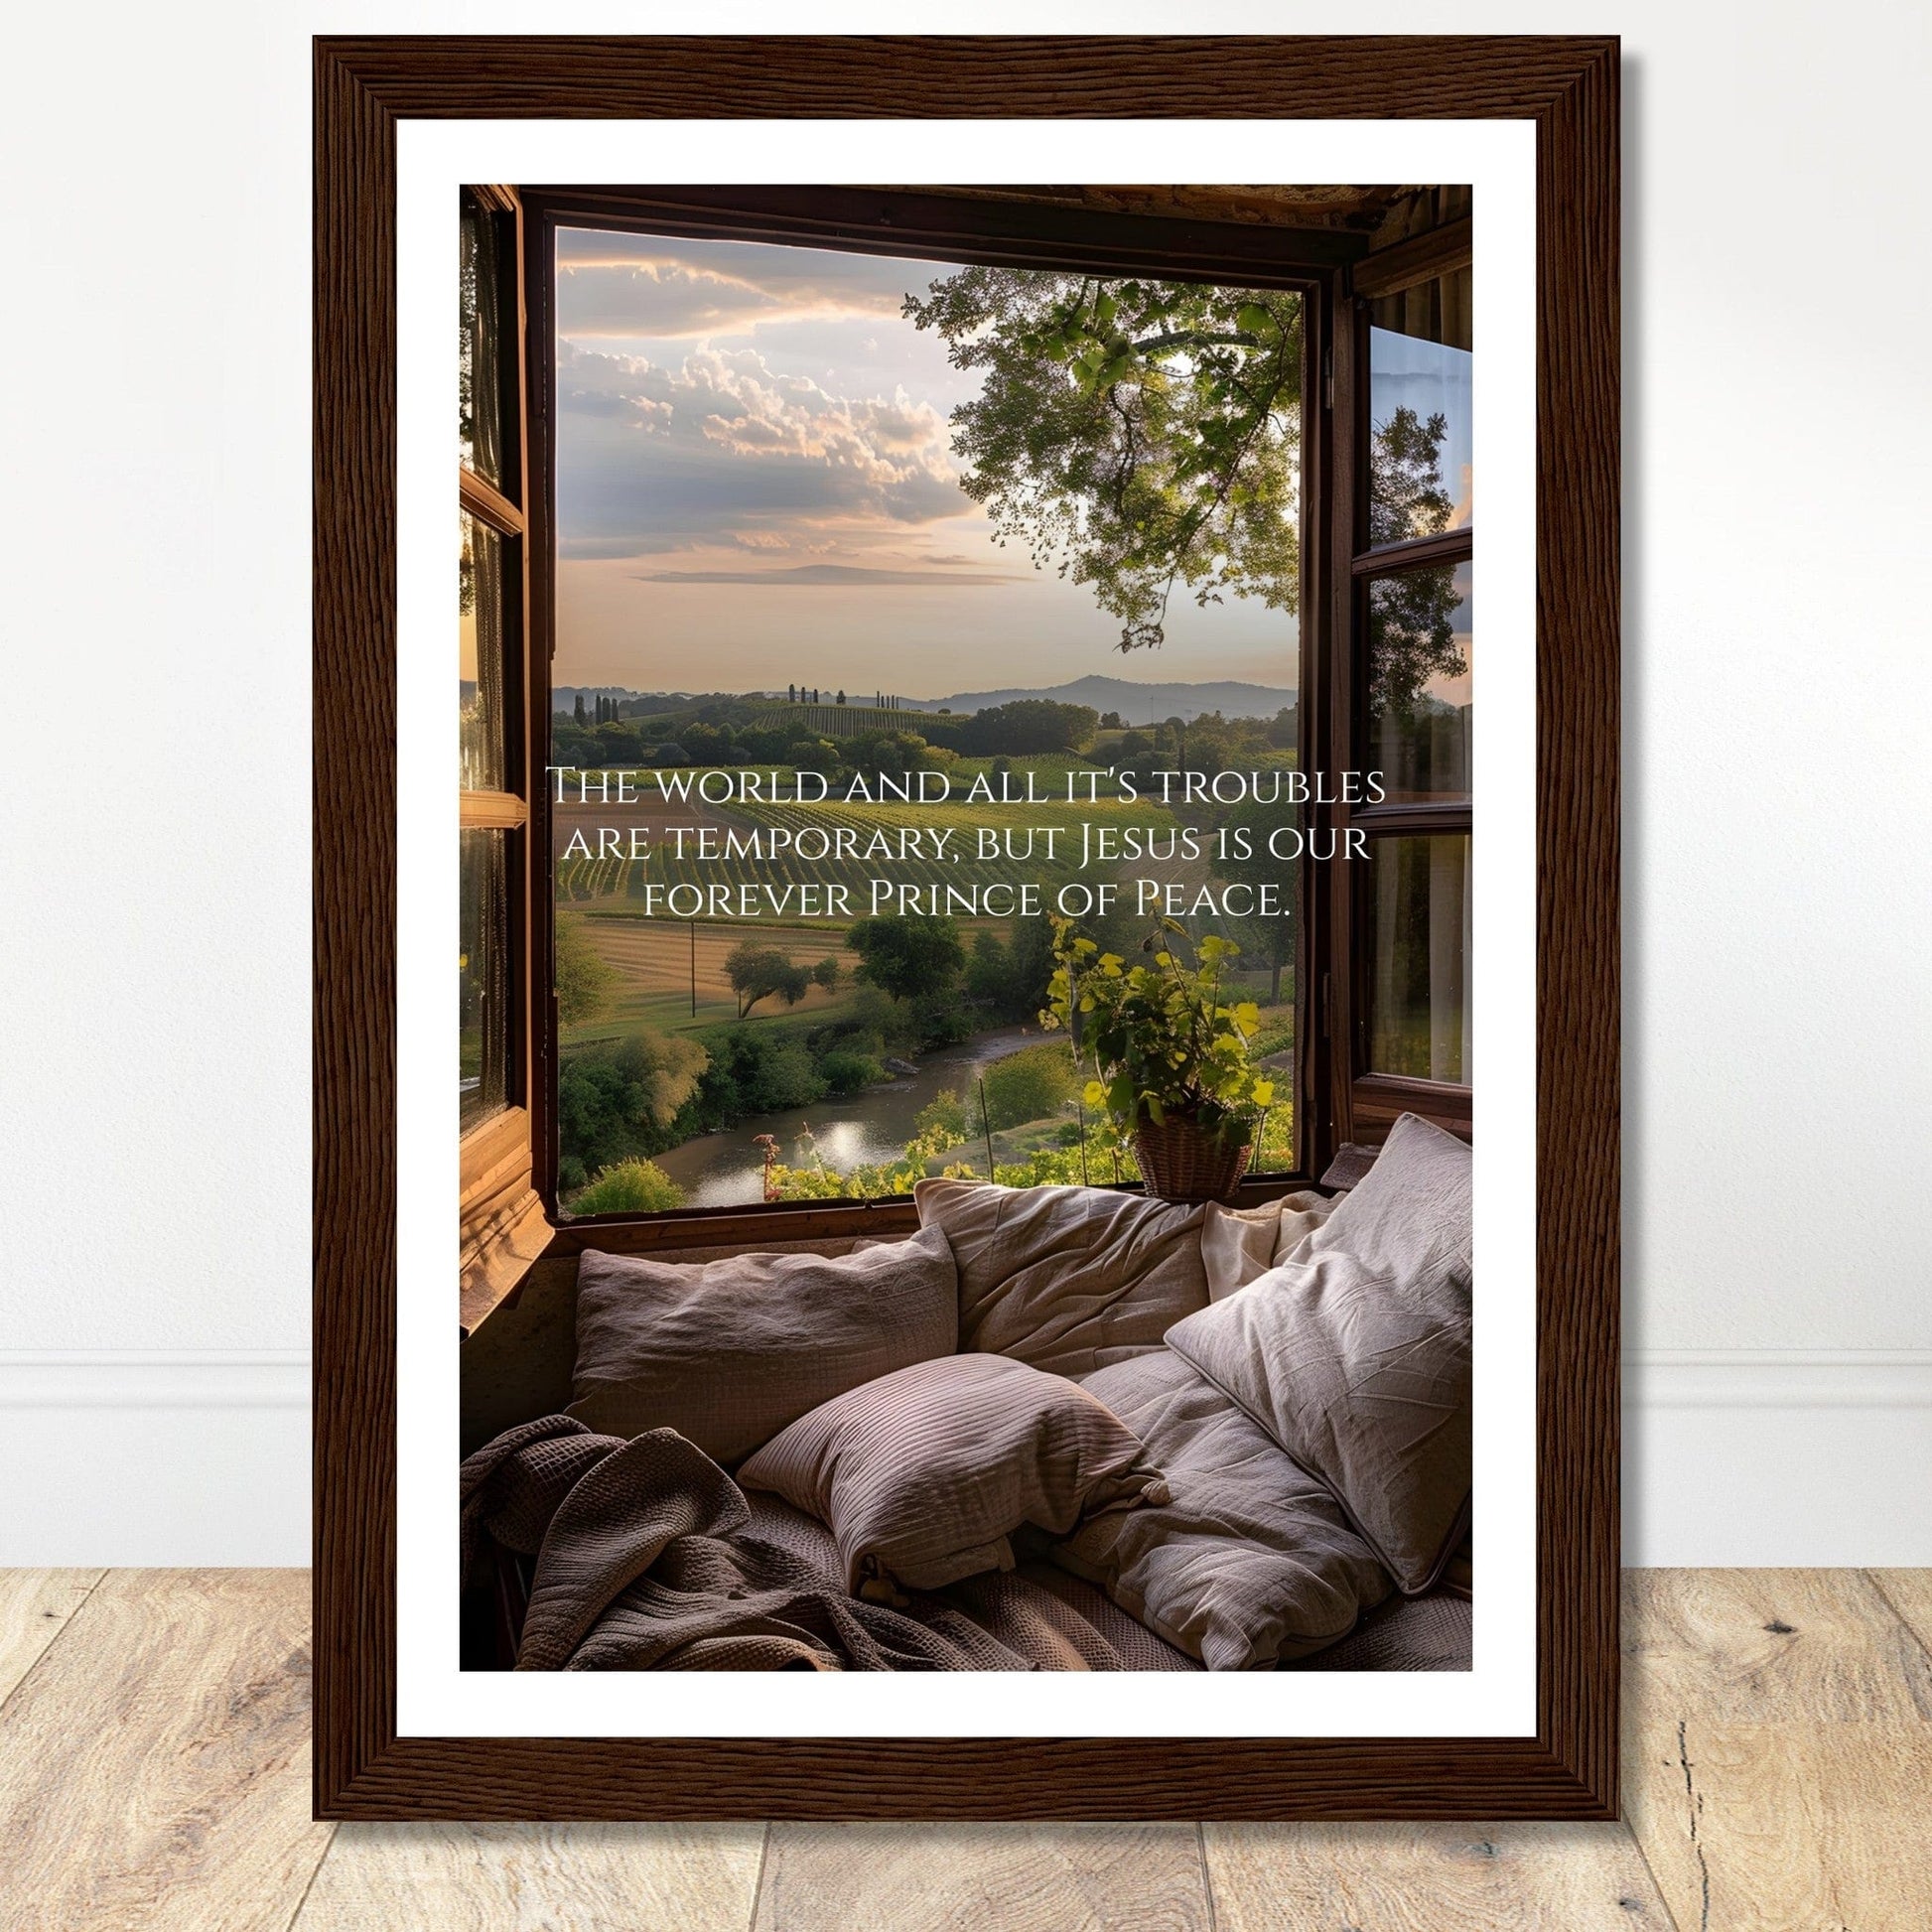 Coffee With My Father Print Material A4 21x29.7 cm / 8x12″ / Premium Matte Paper Wooden Framed Poster / Dark wood frame Jesus, Our Forever Prince of Peace